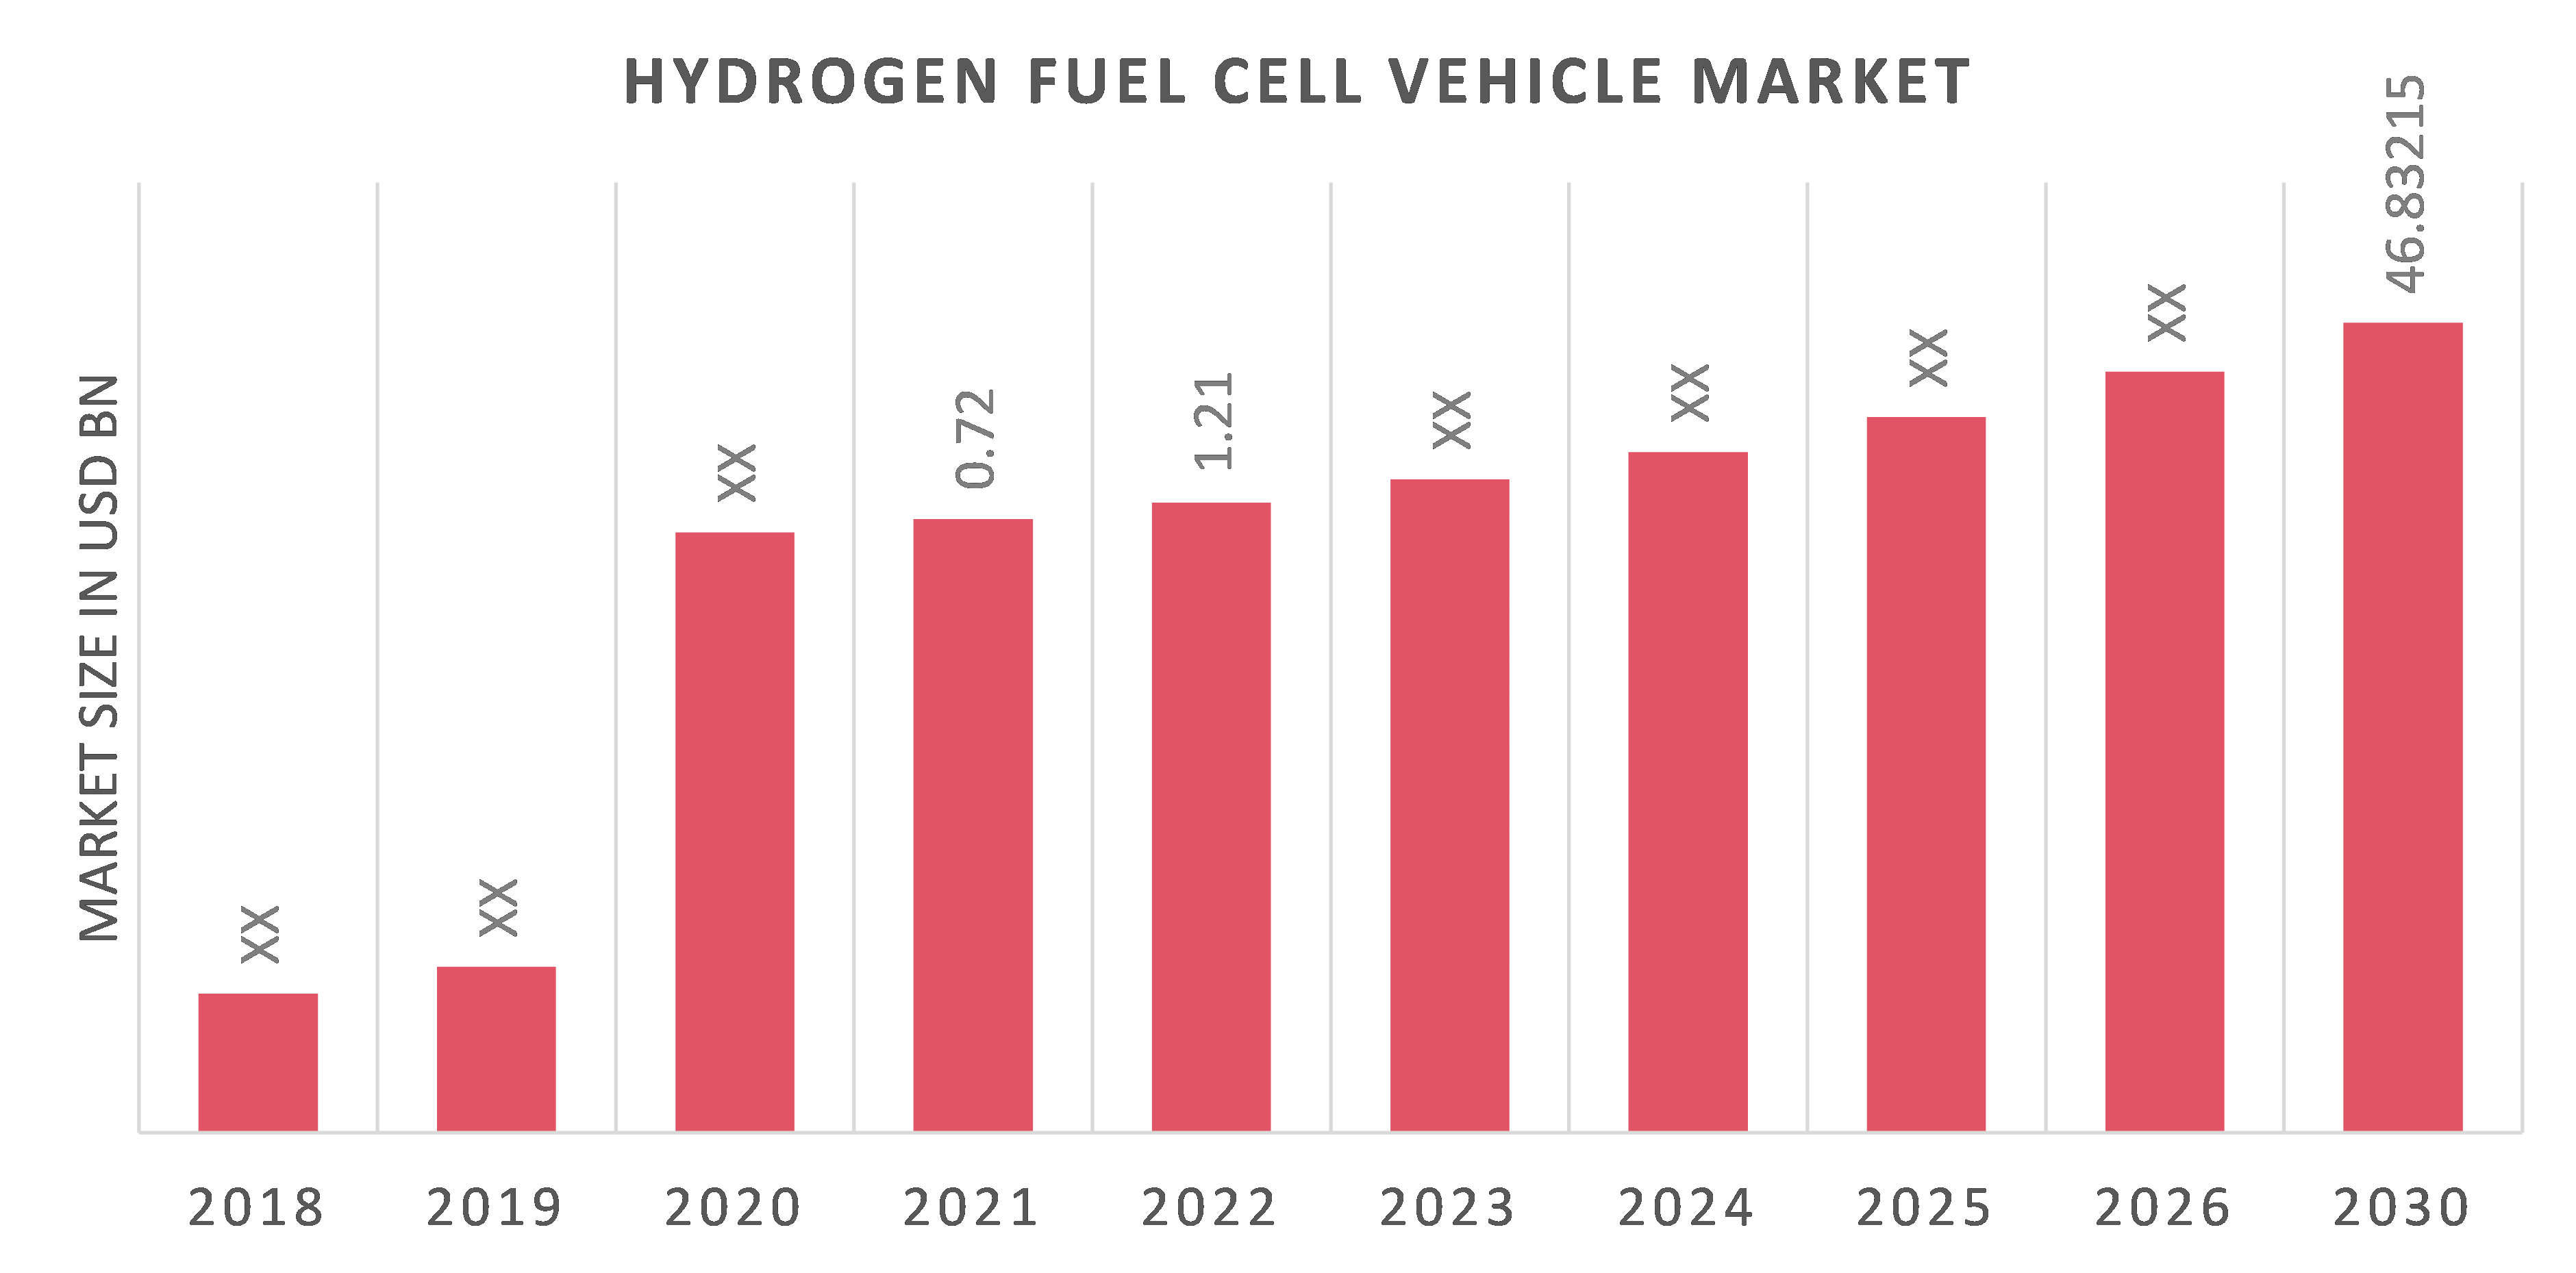 Global Hydrogen Fuel Cell Vehicle Market Overview